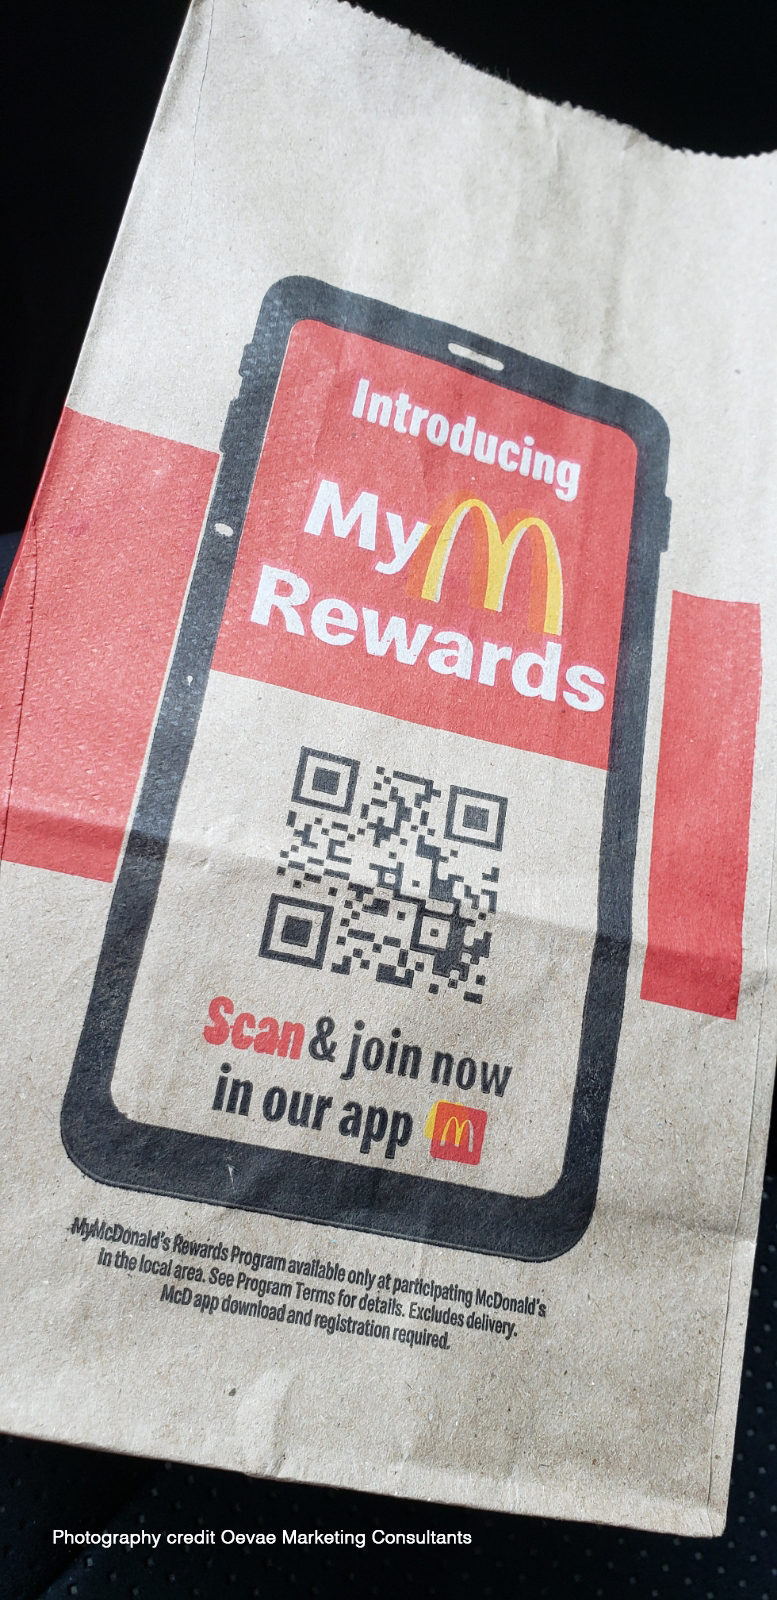 McDonald's My Rewards Join Now Scan QR Code on Bag